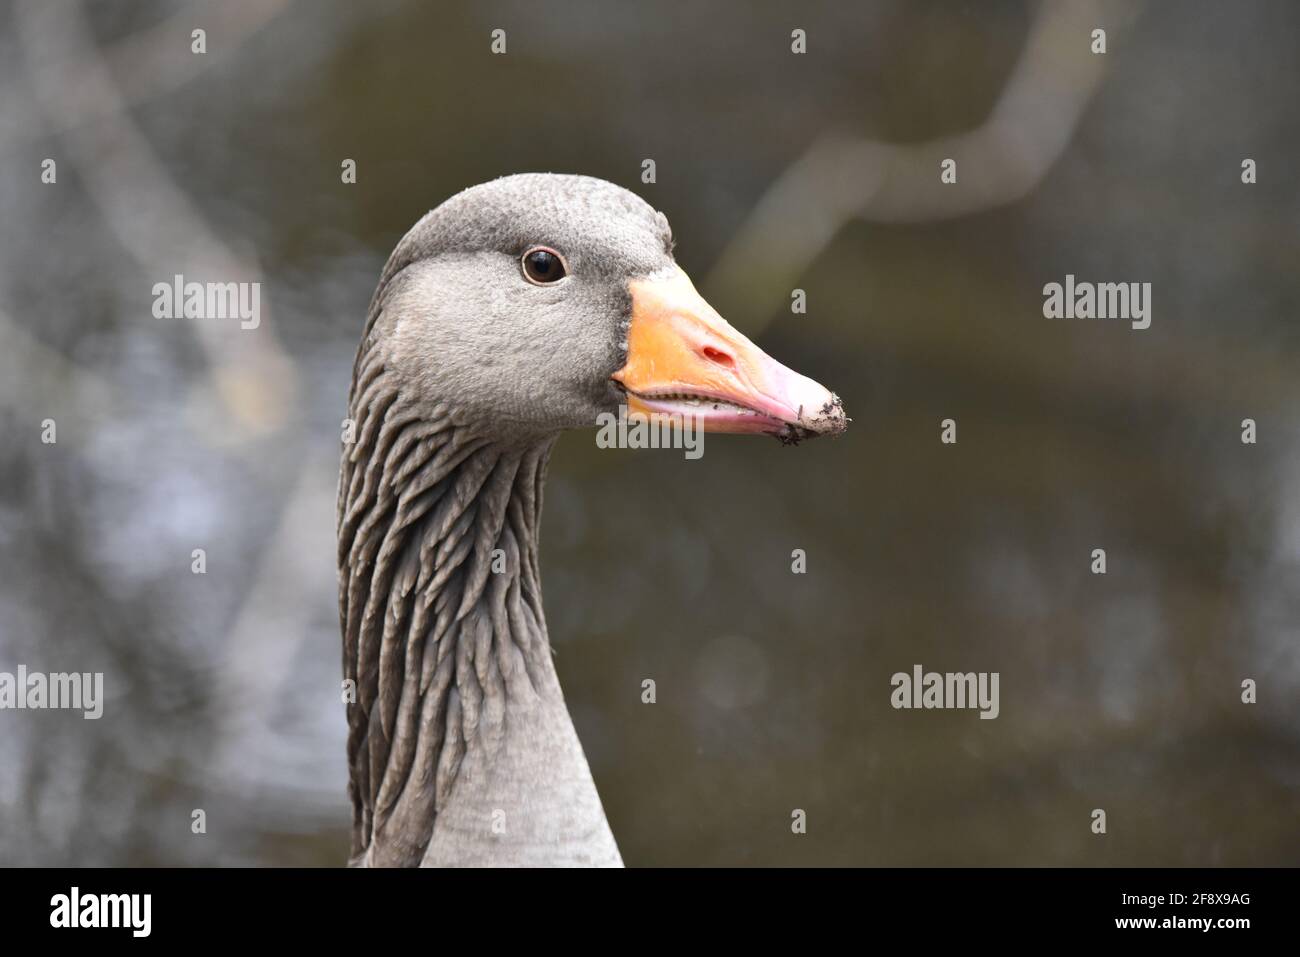 Close-Up Right-Side Head and Neck Portrait of a Greylag Goose (Anser anser) Taken on a Nature Reserve in Staffordshire in Spring Stock Photo